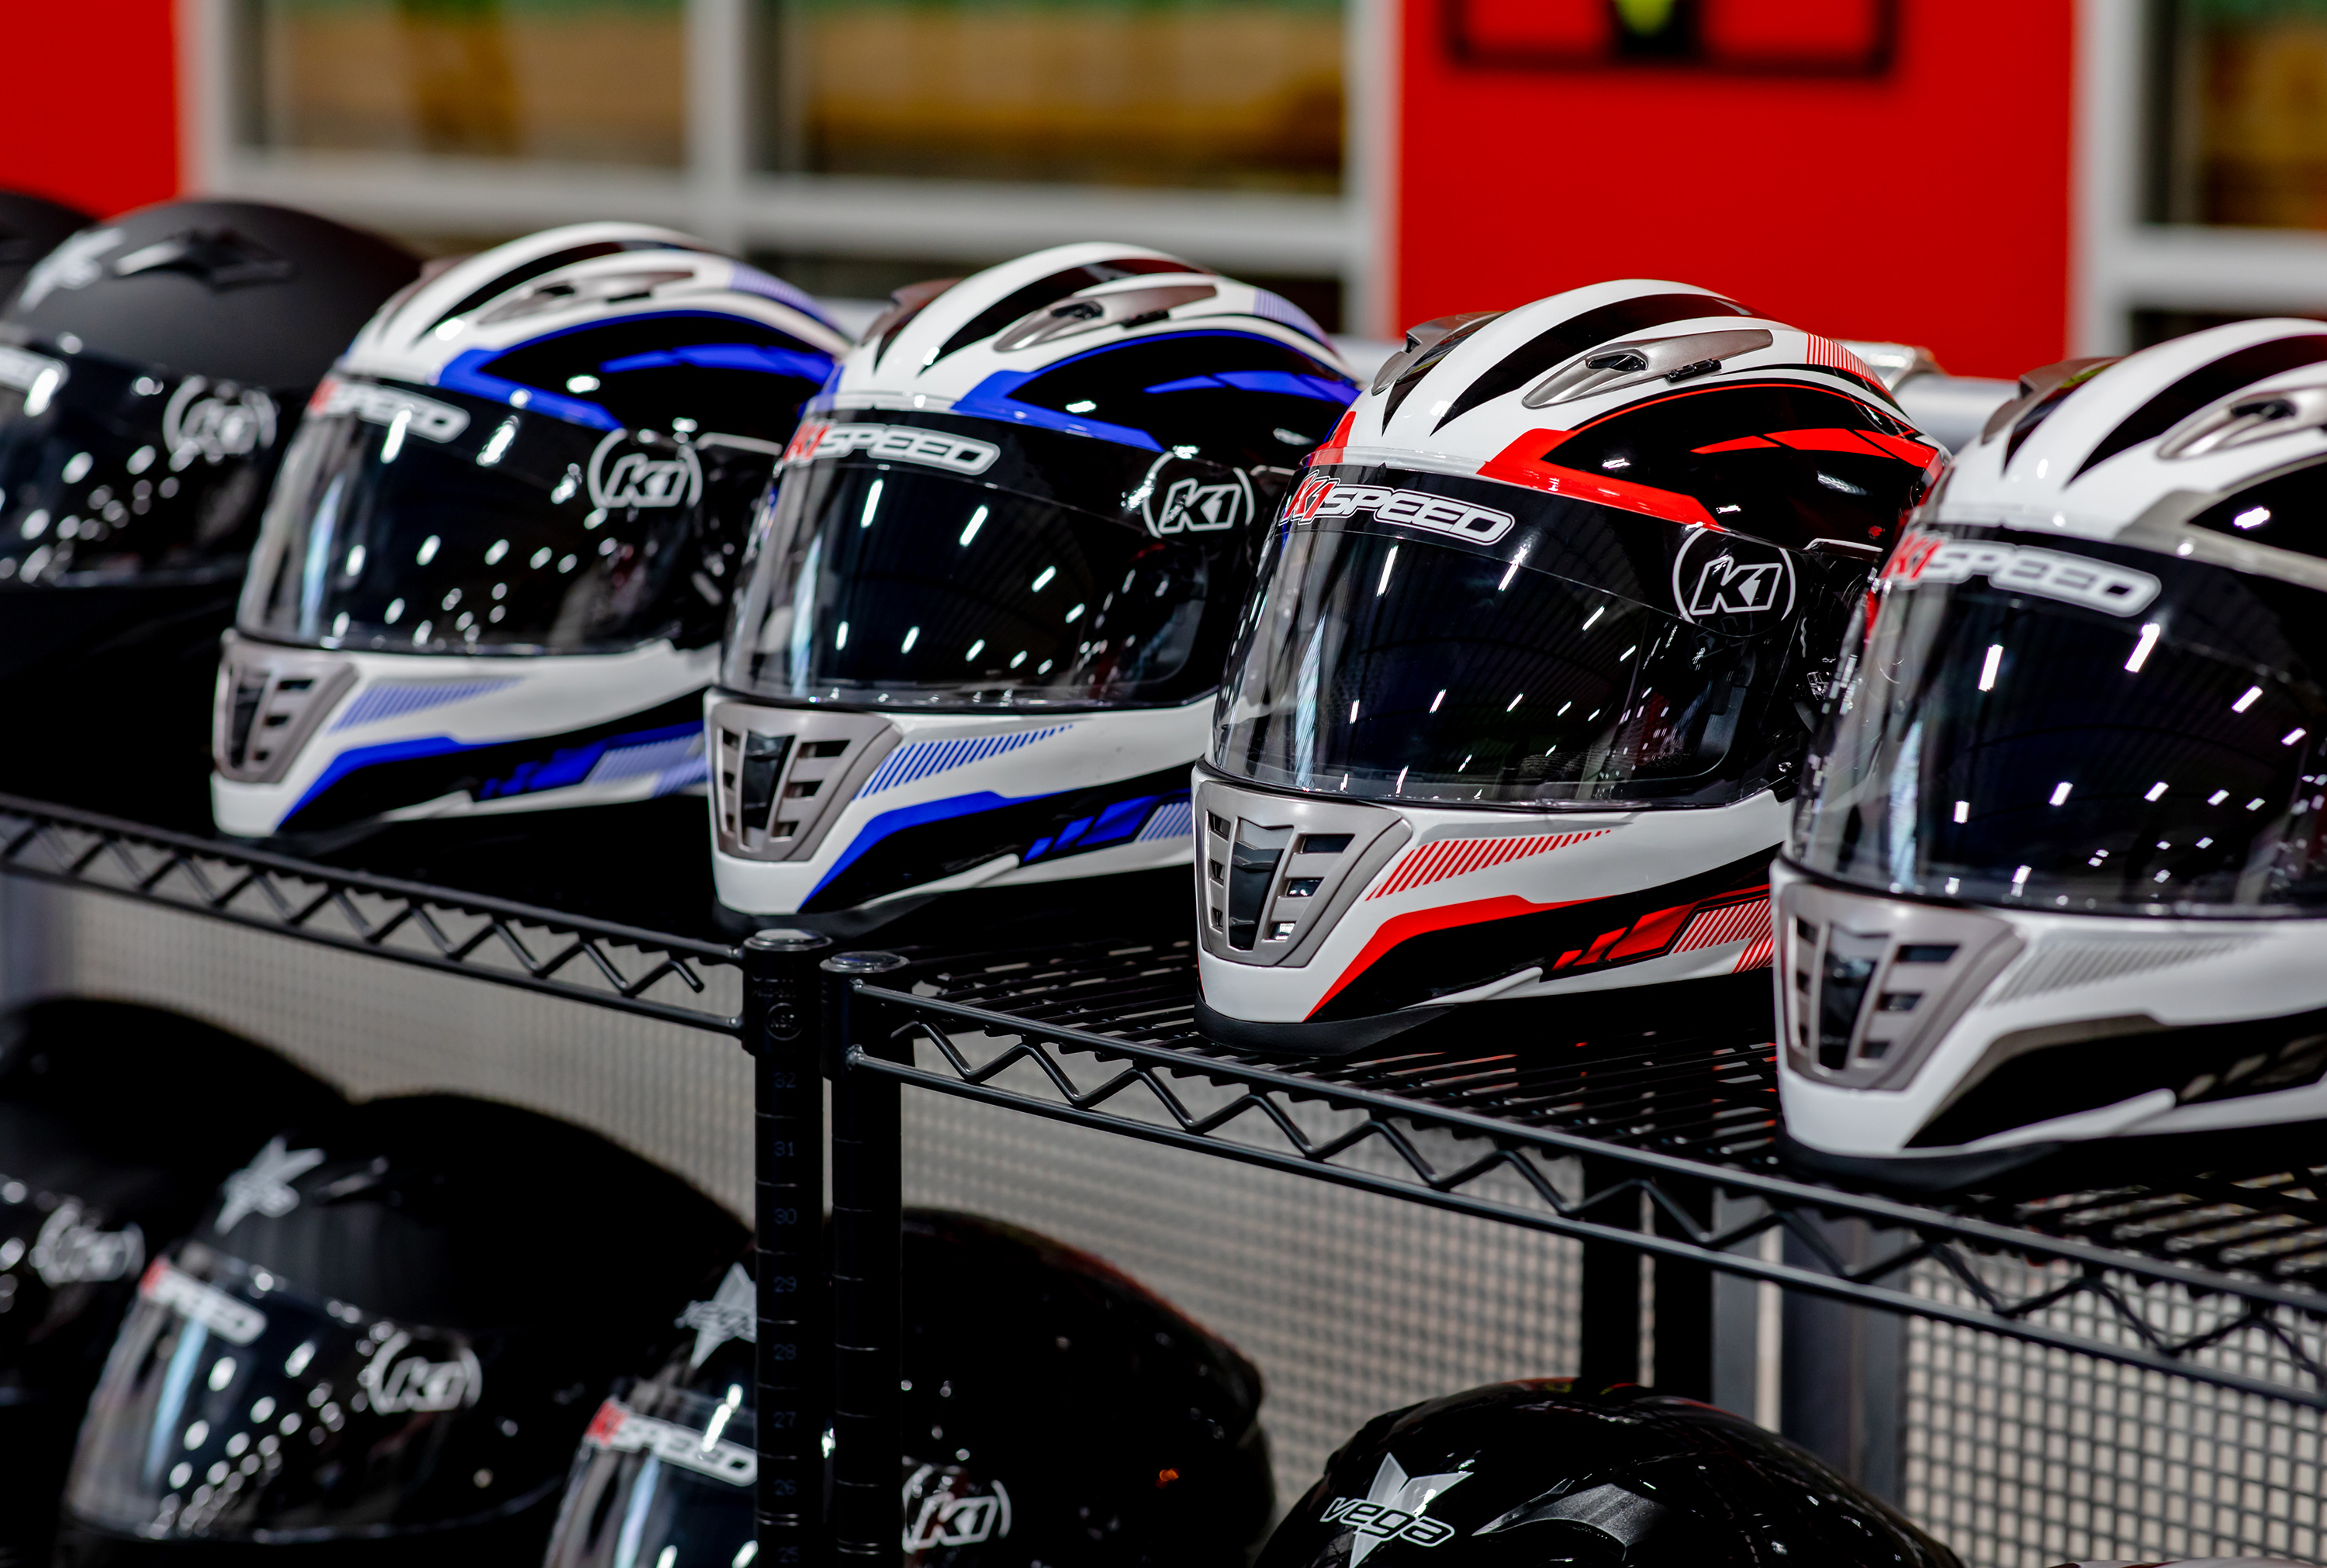 Helmets ready for racers sit neatly in a row at K1 Speed Canton